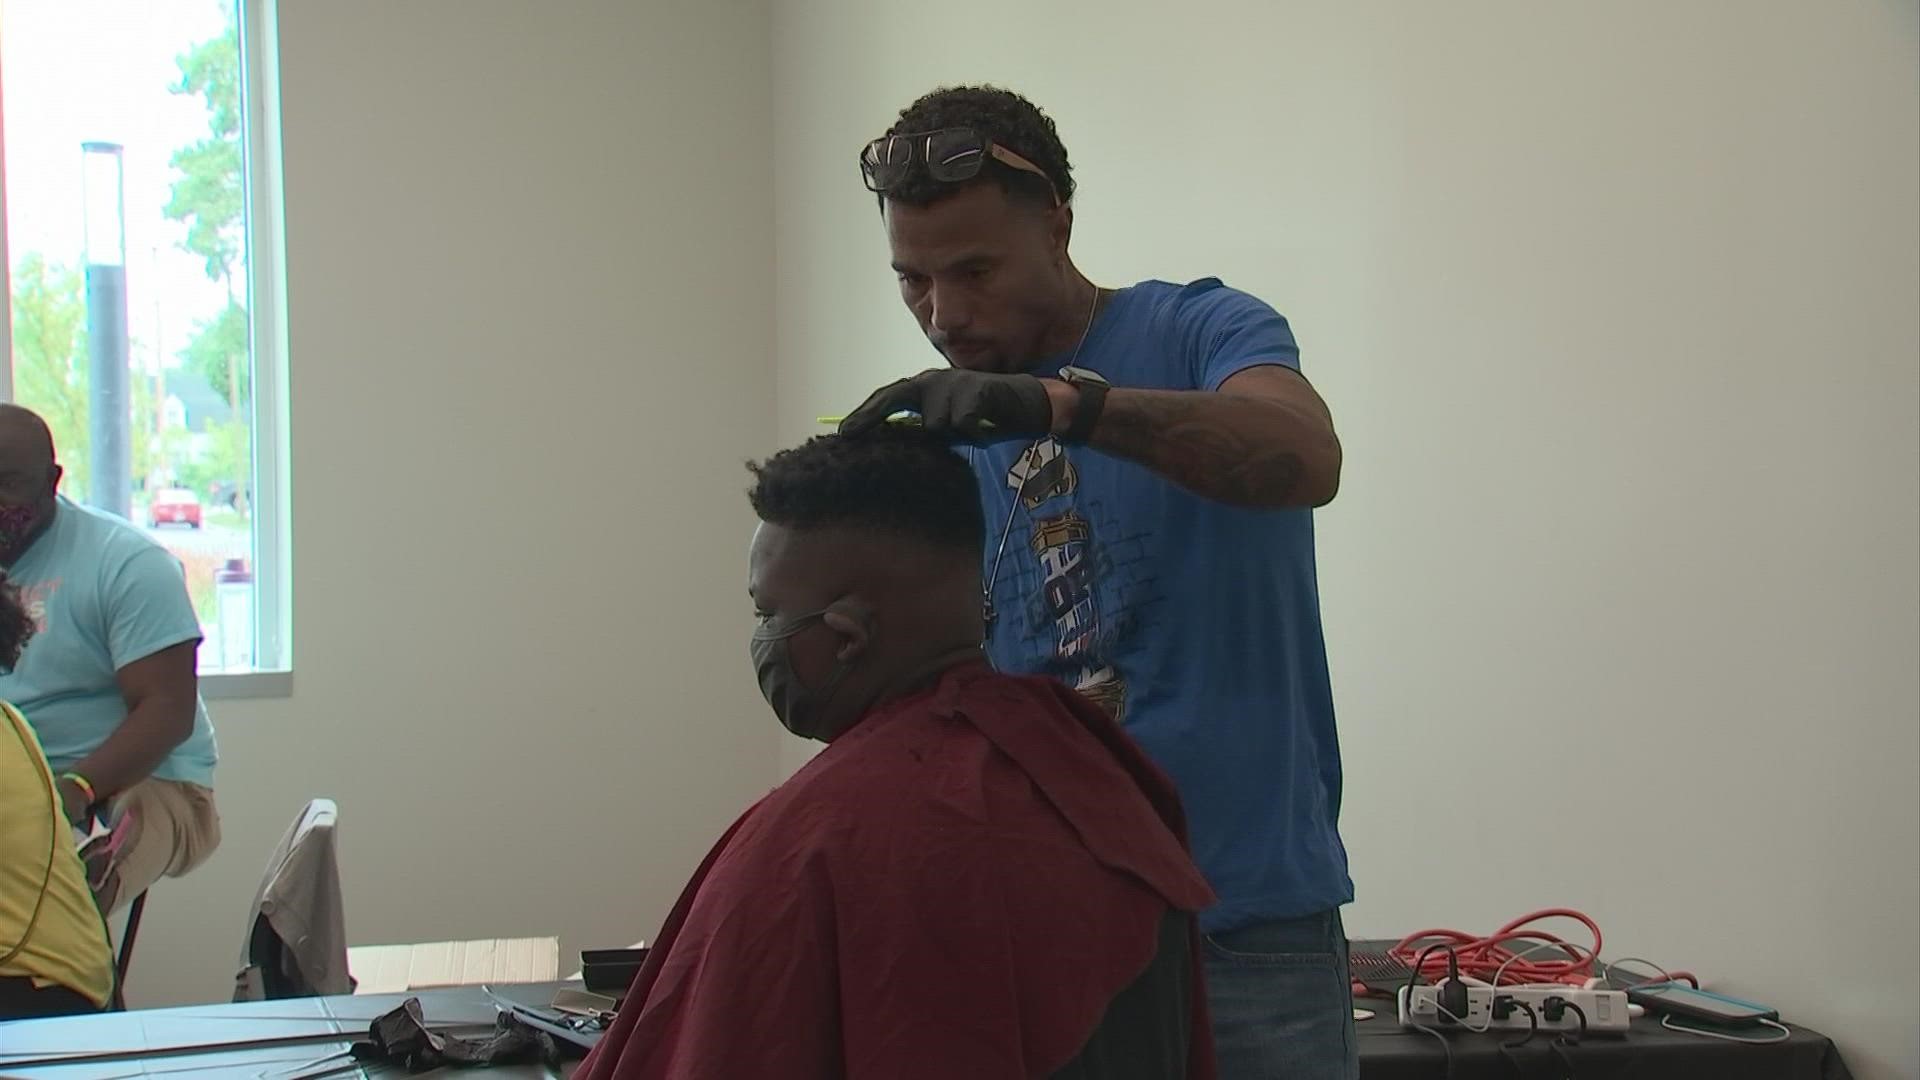 During a two-day event at two Columbus community centers, 100 boys will receive haircuts while 100 girls will work with female officers on arts and crafts.